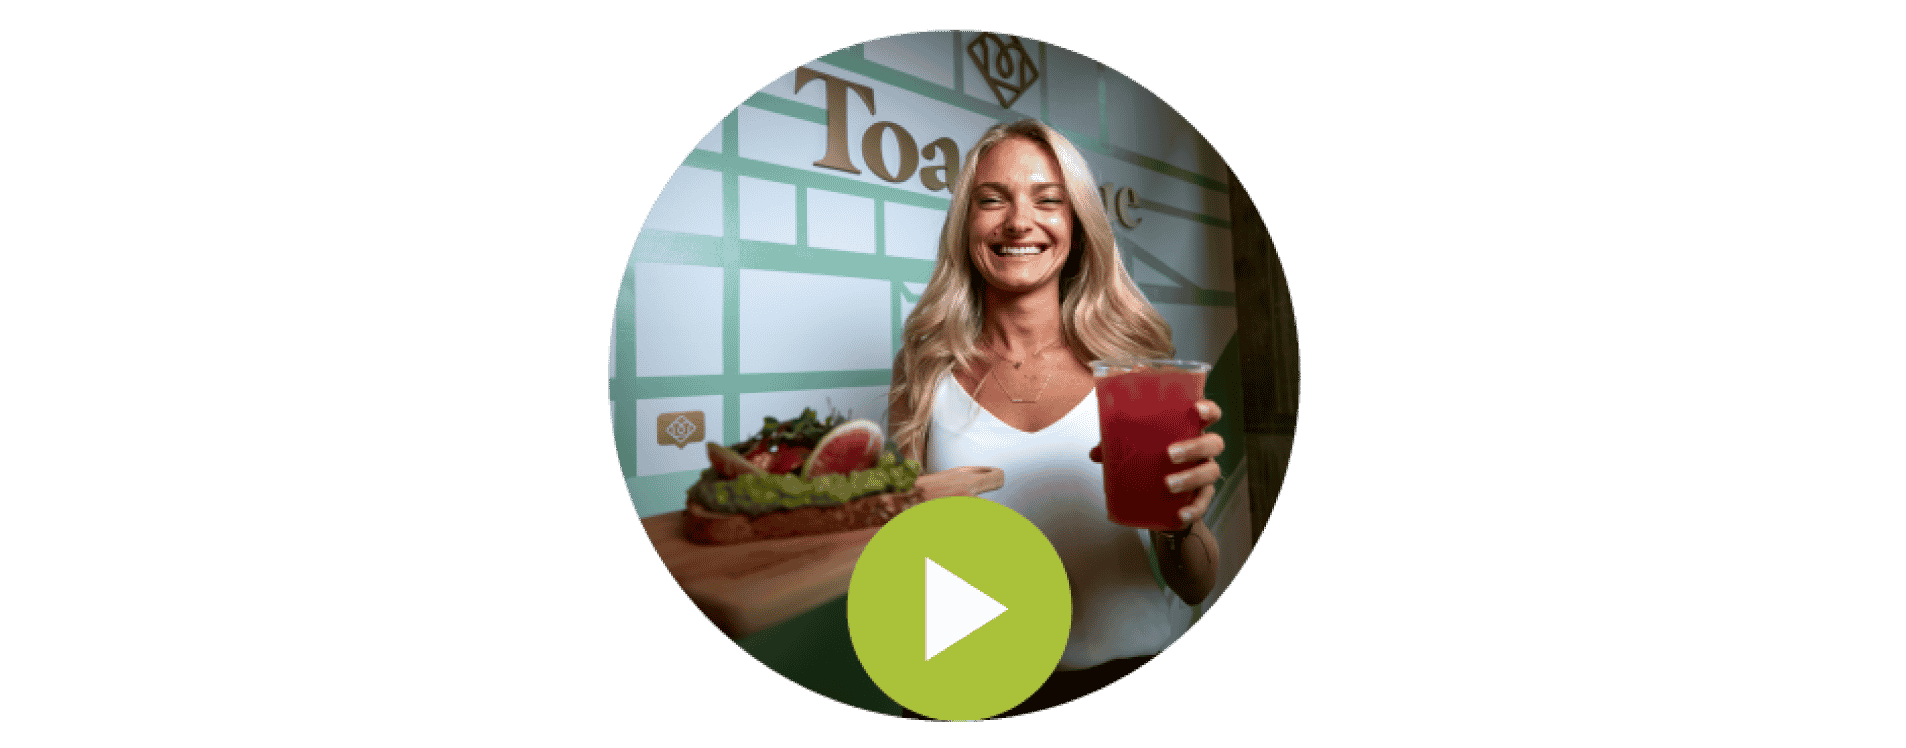 Play Video Graphic - Toastique, Gourmet Toast and Juice Bar